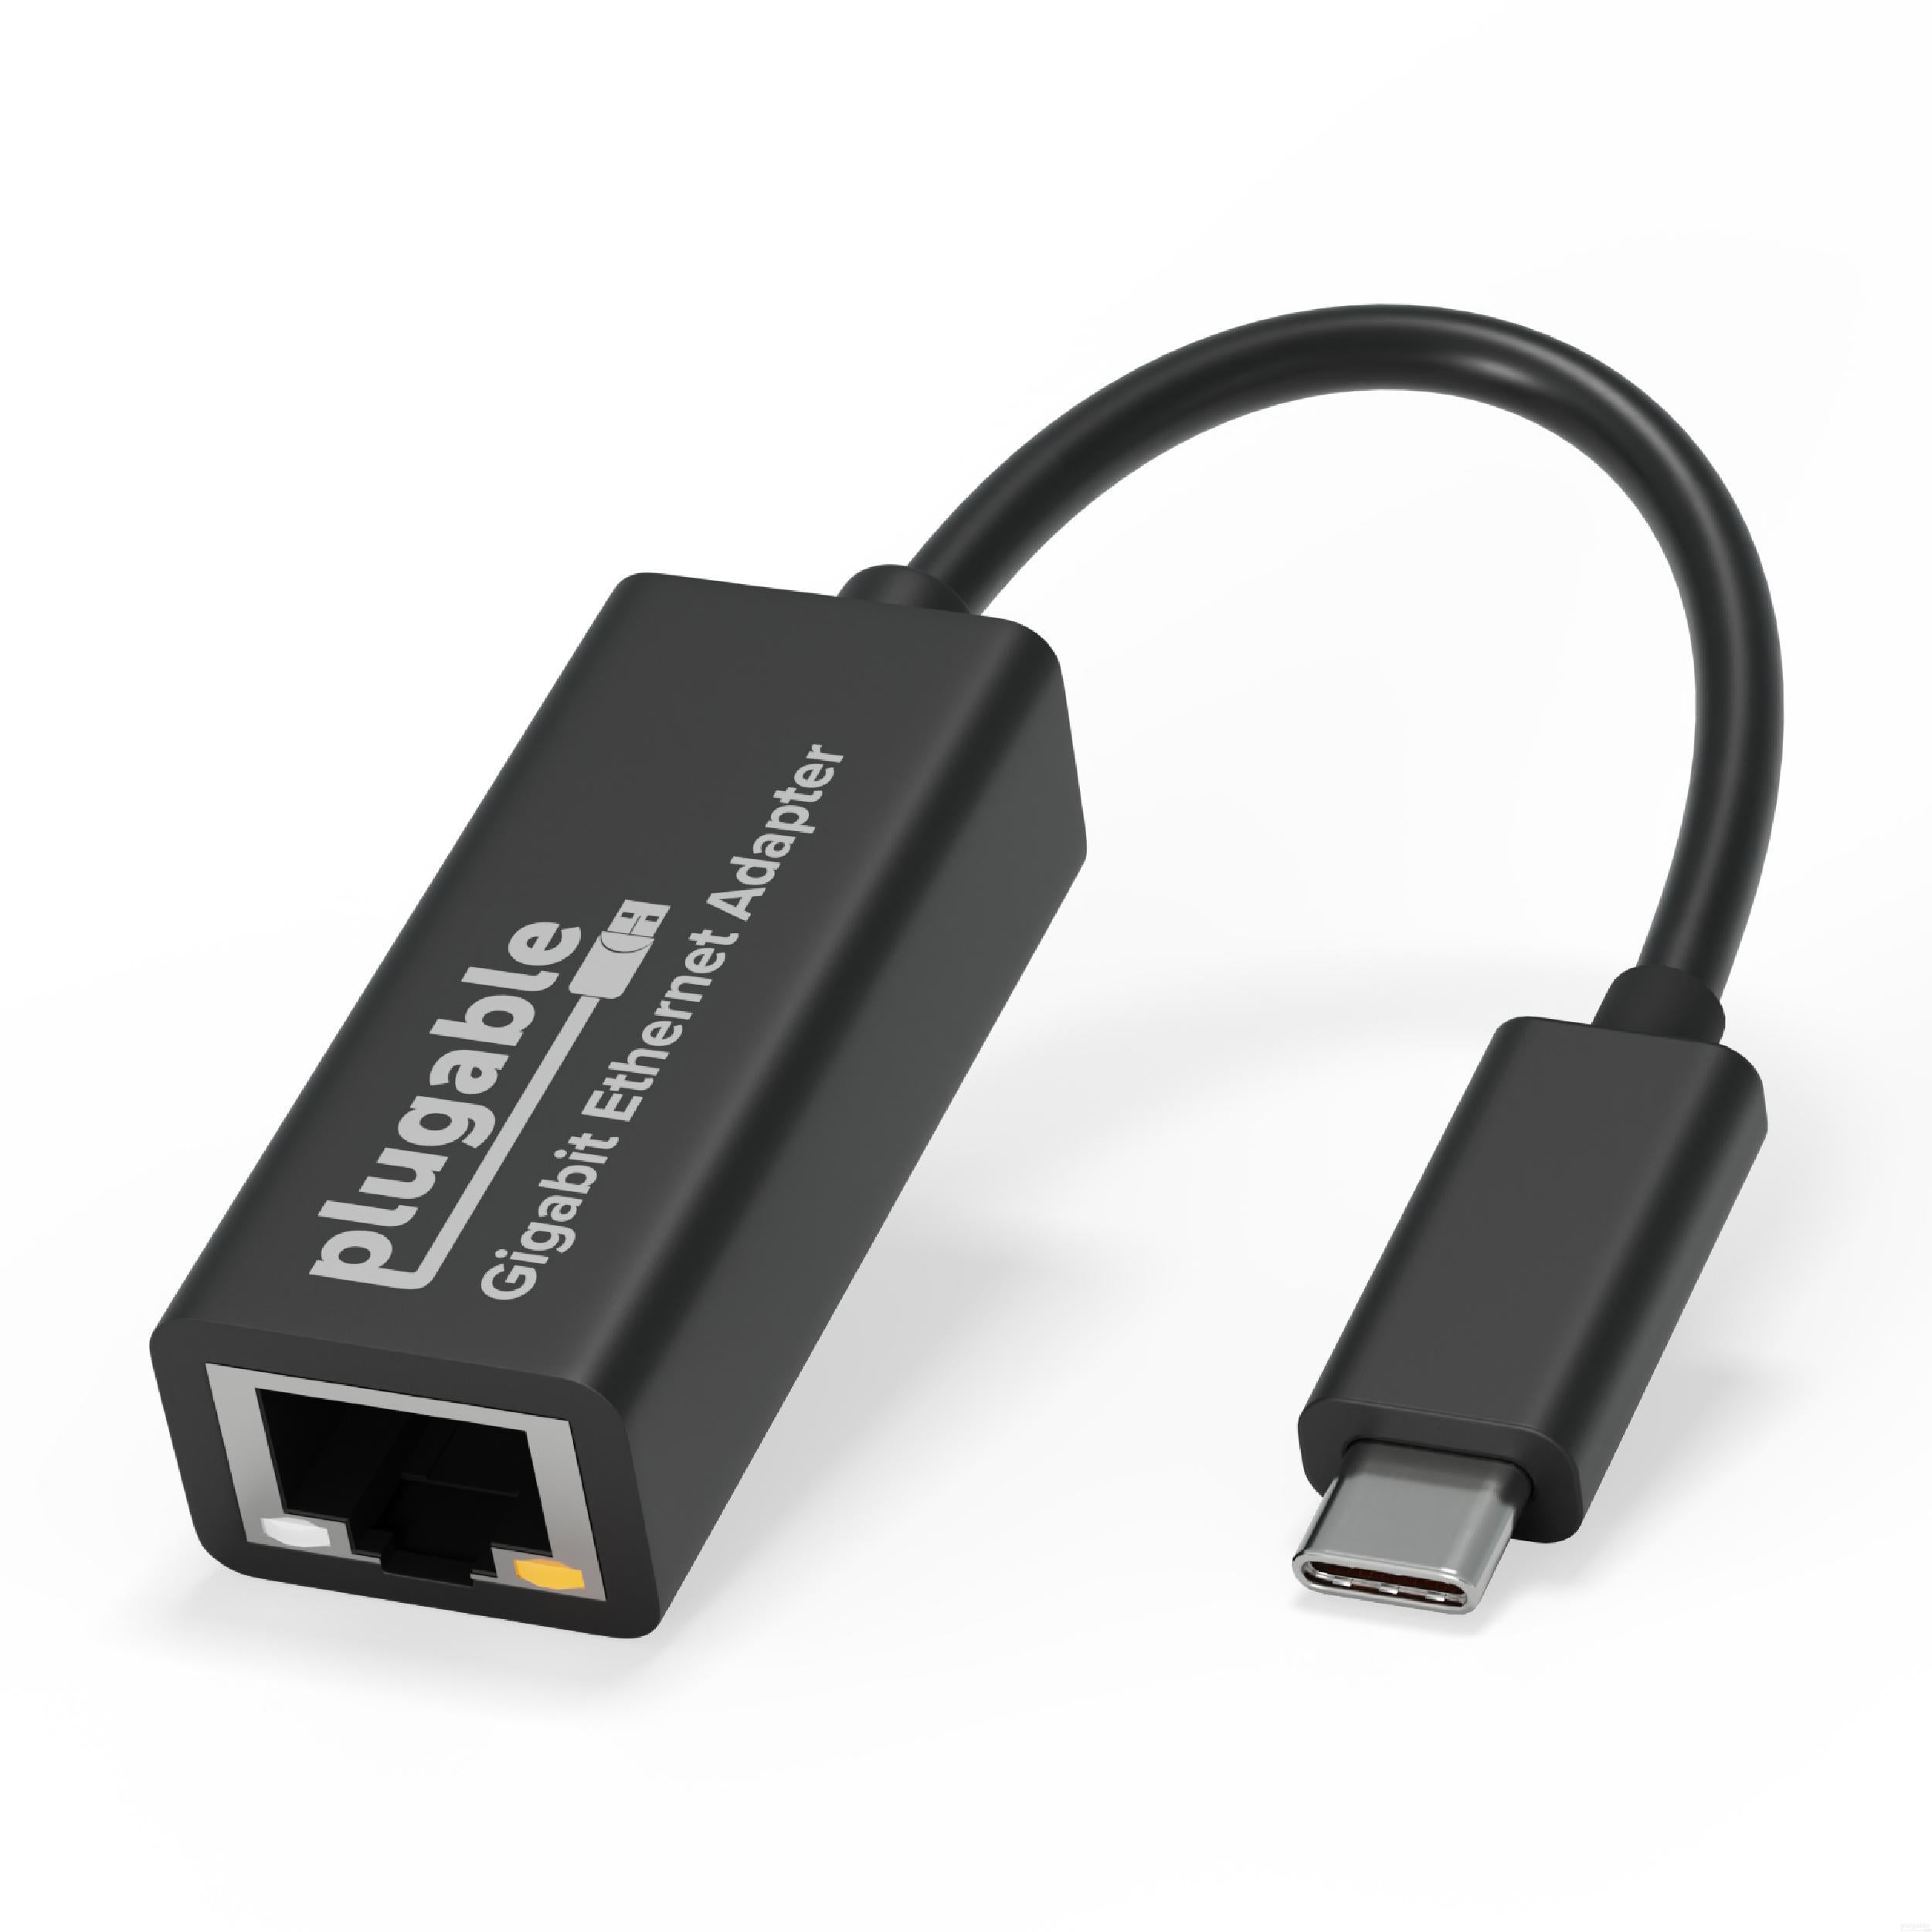 Best USB Bluetooth Dongle for PC? Plugable USB Bluetooth 4.0 Adapter Review  